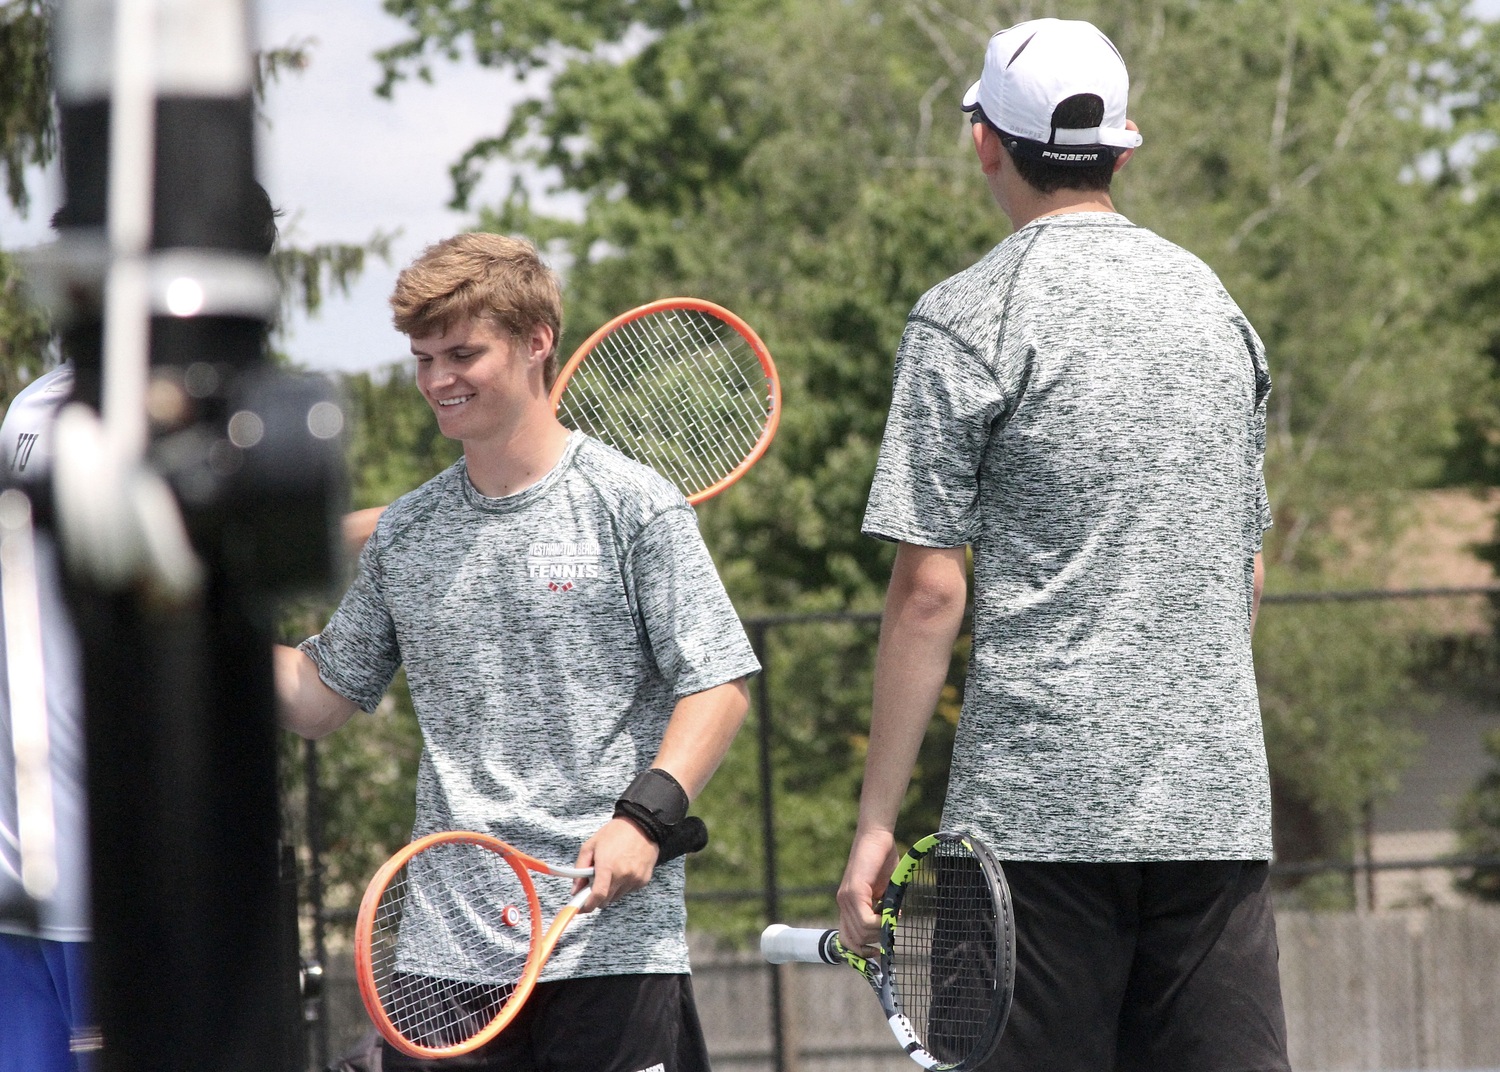 Westhampton Beach junior Bobby Stabile is all smiles after his and Giancarlo Volpe's semifinal win. DESIRÉE KEEGAN